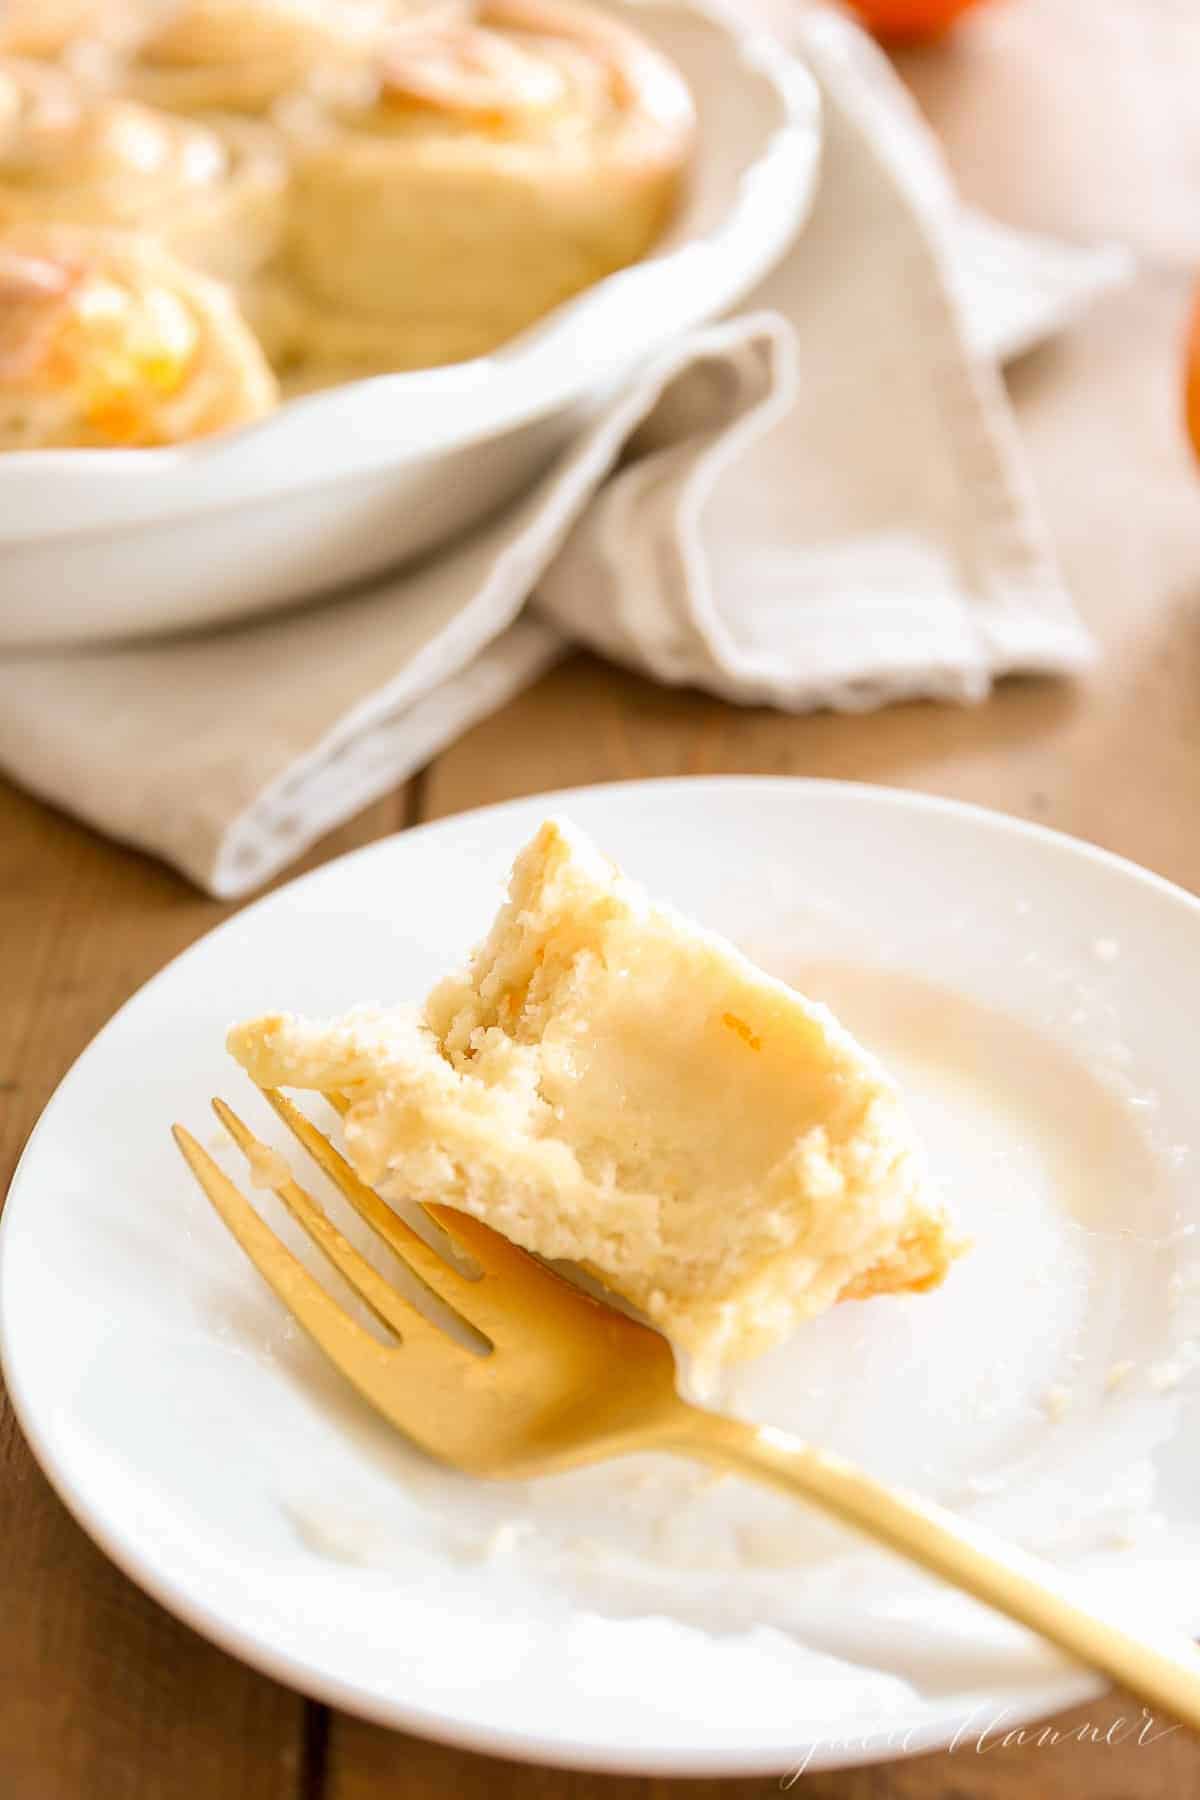 A piece of a homemade orange roll on a white plate with a gold fork.